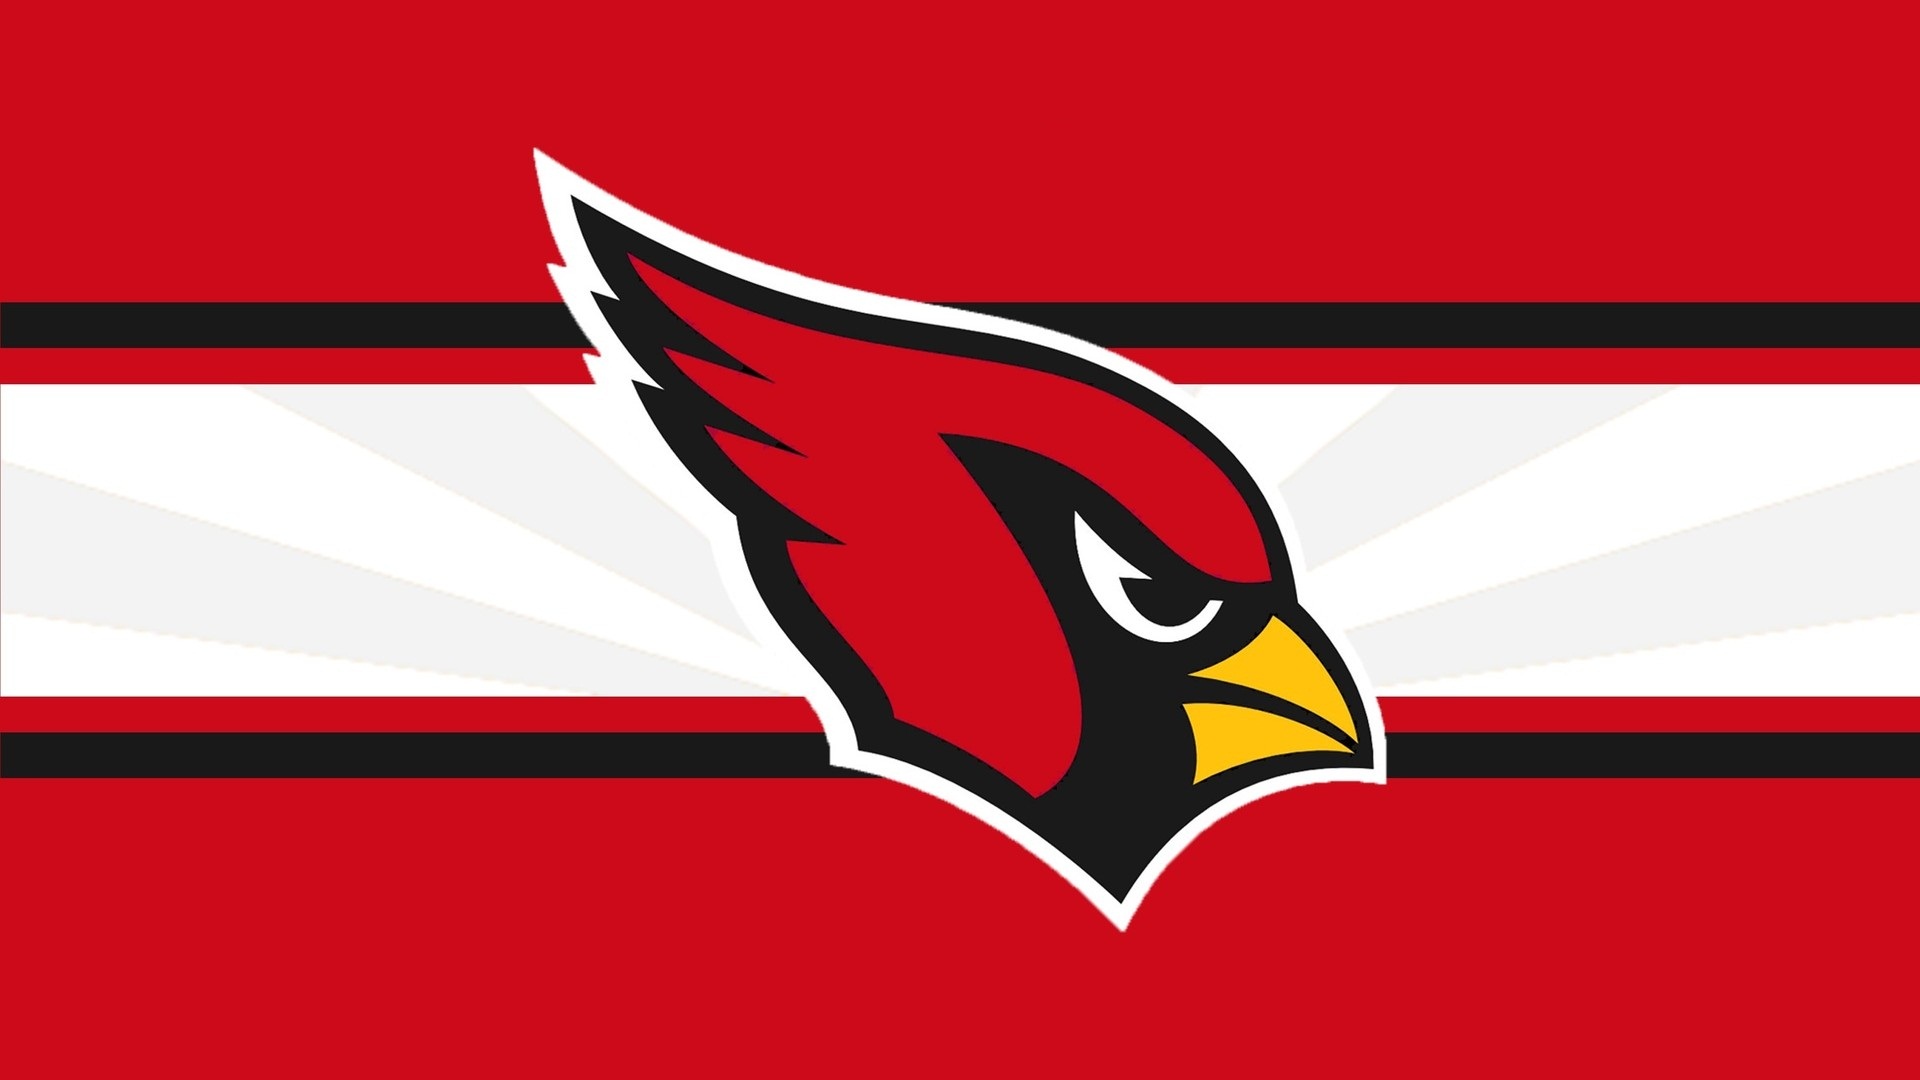 Windows Wallpaper Cardinals With high-resolution X pixel. You can use this wallpaper for your Mac or Windows Desktop Background, iPhone, Android or Tablet and another Smartphone device